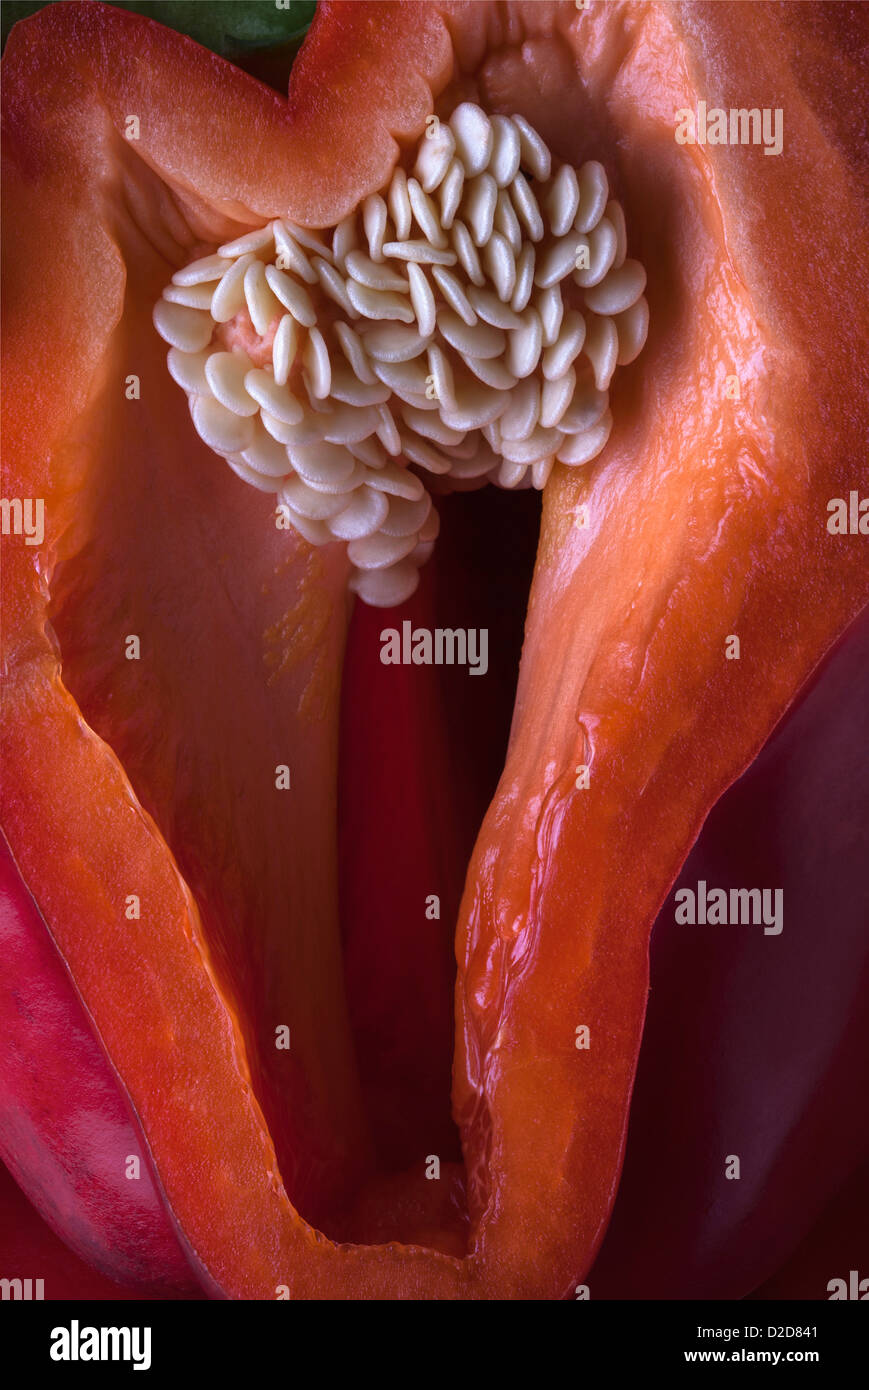 A suggestive looking cross section of a bell pepper, close-up, full frame Stock Photo